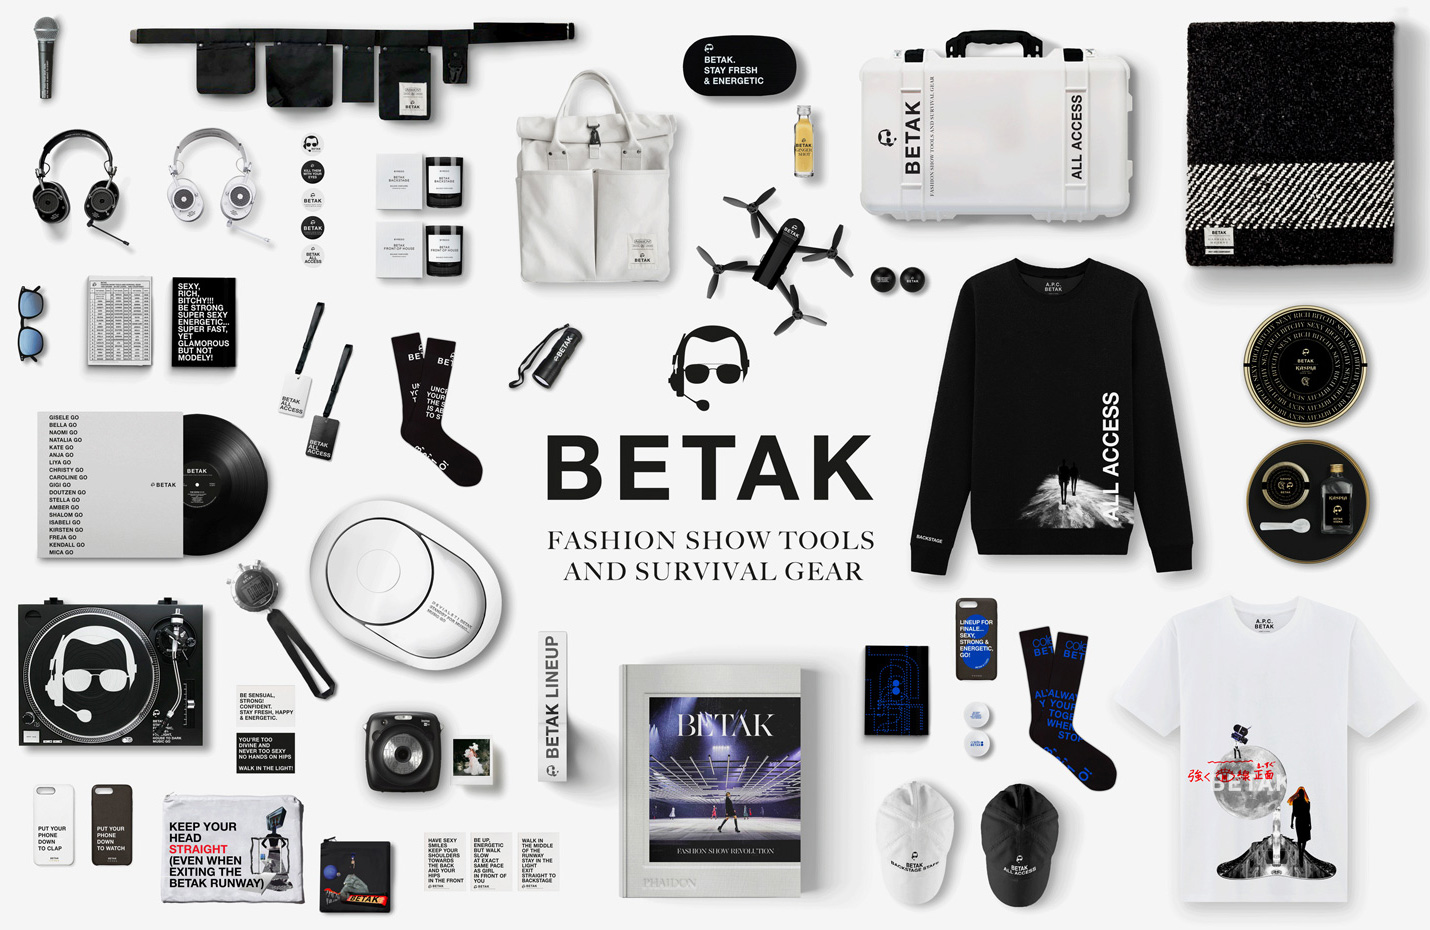 Colette's new Betak collection. Image courtesy of Colette